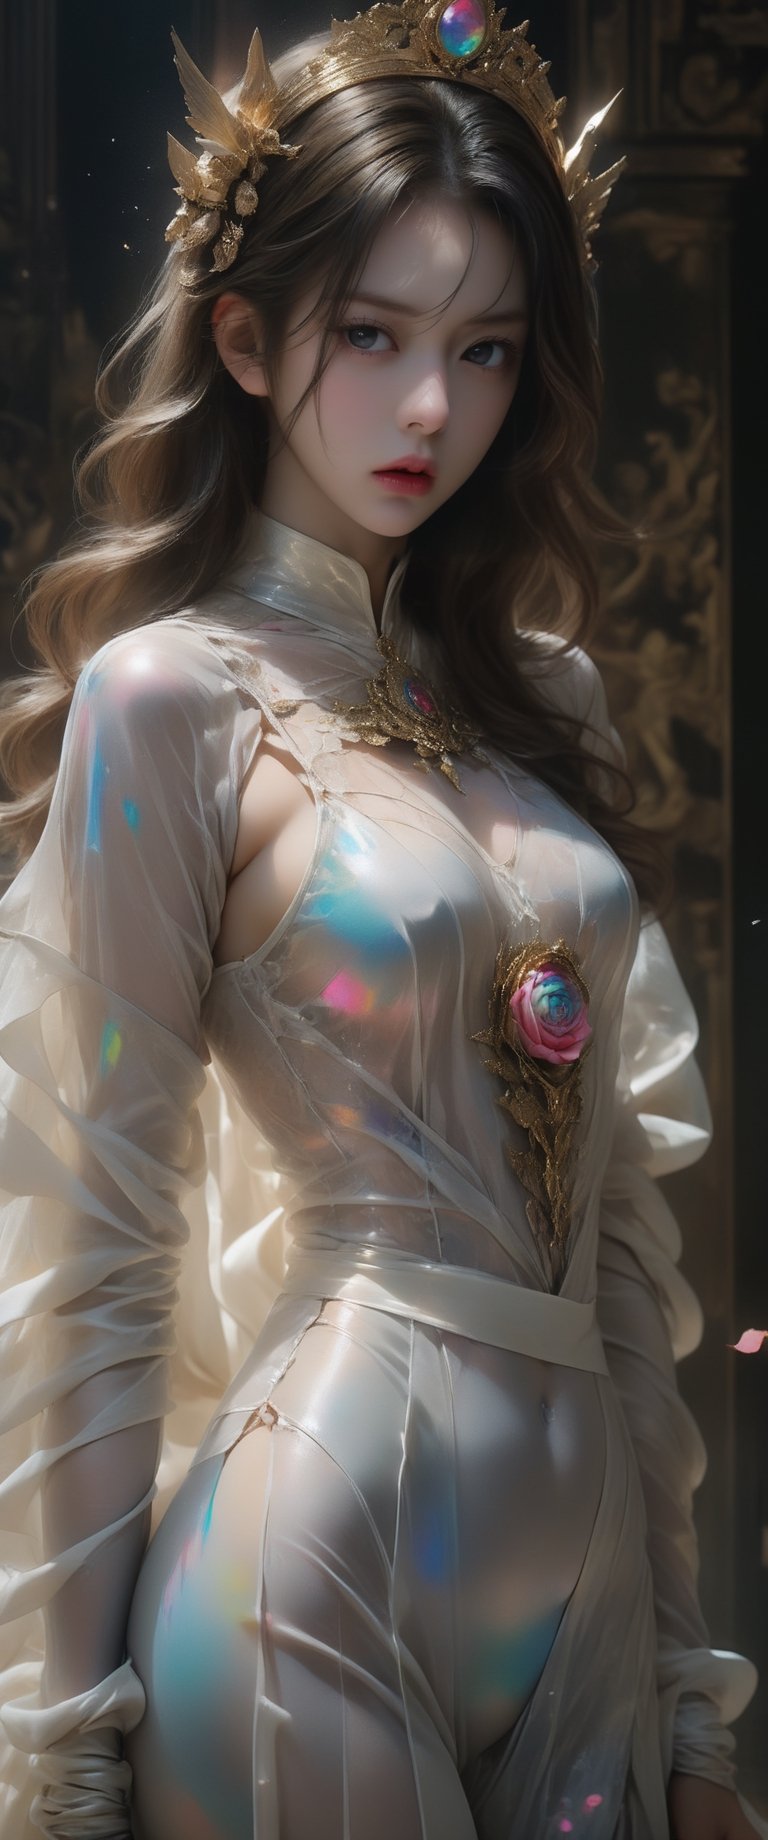 breathtaking ethereal RAW photo of female ((poster of a sexy [(Masterpiece),best quality,High detailed,girl,brunette,temple maiden,perfect female body,white see trough cloth,thin silk fabrics,ornate,intricate,gold, in sacred temple, temple of godess, feminine,sexy,erotic,lewd, sexy statues, beautifull decore, colorful, pink,soft,fluffy, dim light, lewd, lewd pose,suggestive, warm,welcoming,
 ] in a [ ], pissed_off,angry, latex uniform, eye angle view, ,dark anim,minsi,goeun, , , )), dark and moody style, perfect face, outstretched perfect hands . masterpiece, professional, award-winning, intricate details, ultra high detailed, 64k, dramatic light, volumetric light, dynamic lighting, Epic, splash art .. ), by james jean $, roby dwi antono $, ross tran $. francis bacon $, michal mraz $, adrian ghenie $, petra cortright $, gerhard richter $, takato yamamoto $, ashley wood, tense atmospheric, , , , sooyaaa,IMGFIX,Comic Book-Style,Movie Aesthetic,action shot,photo r3al,bad quality image,oil painting, cinematic moviemaker style,Japan Vibes,H effect,koh_yunjung ,koh_yunjung,kwon-nara,sooyaaa,colorful,roses_are_rosie,armor,han-hyoju-xl
